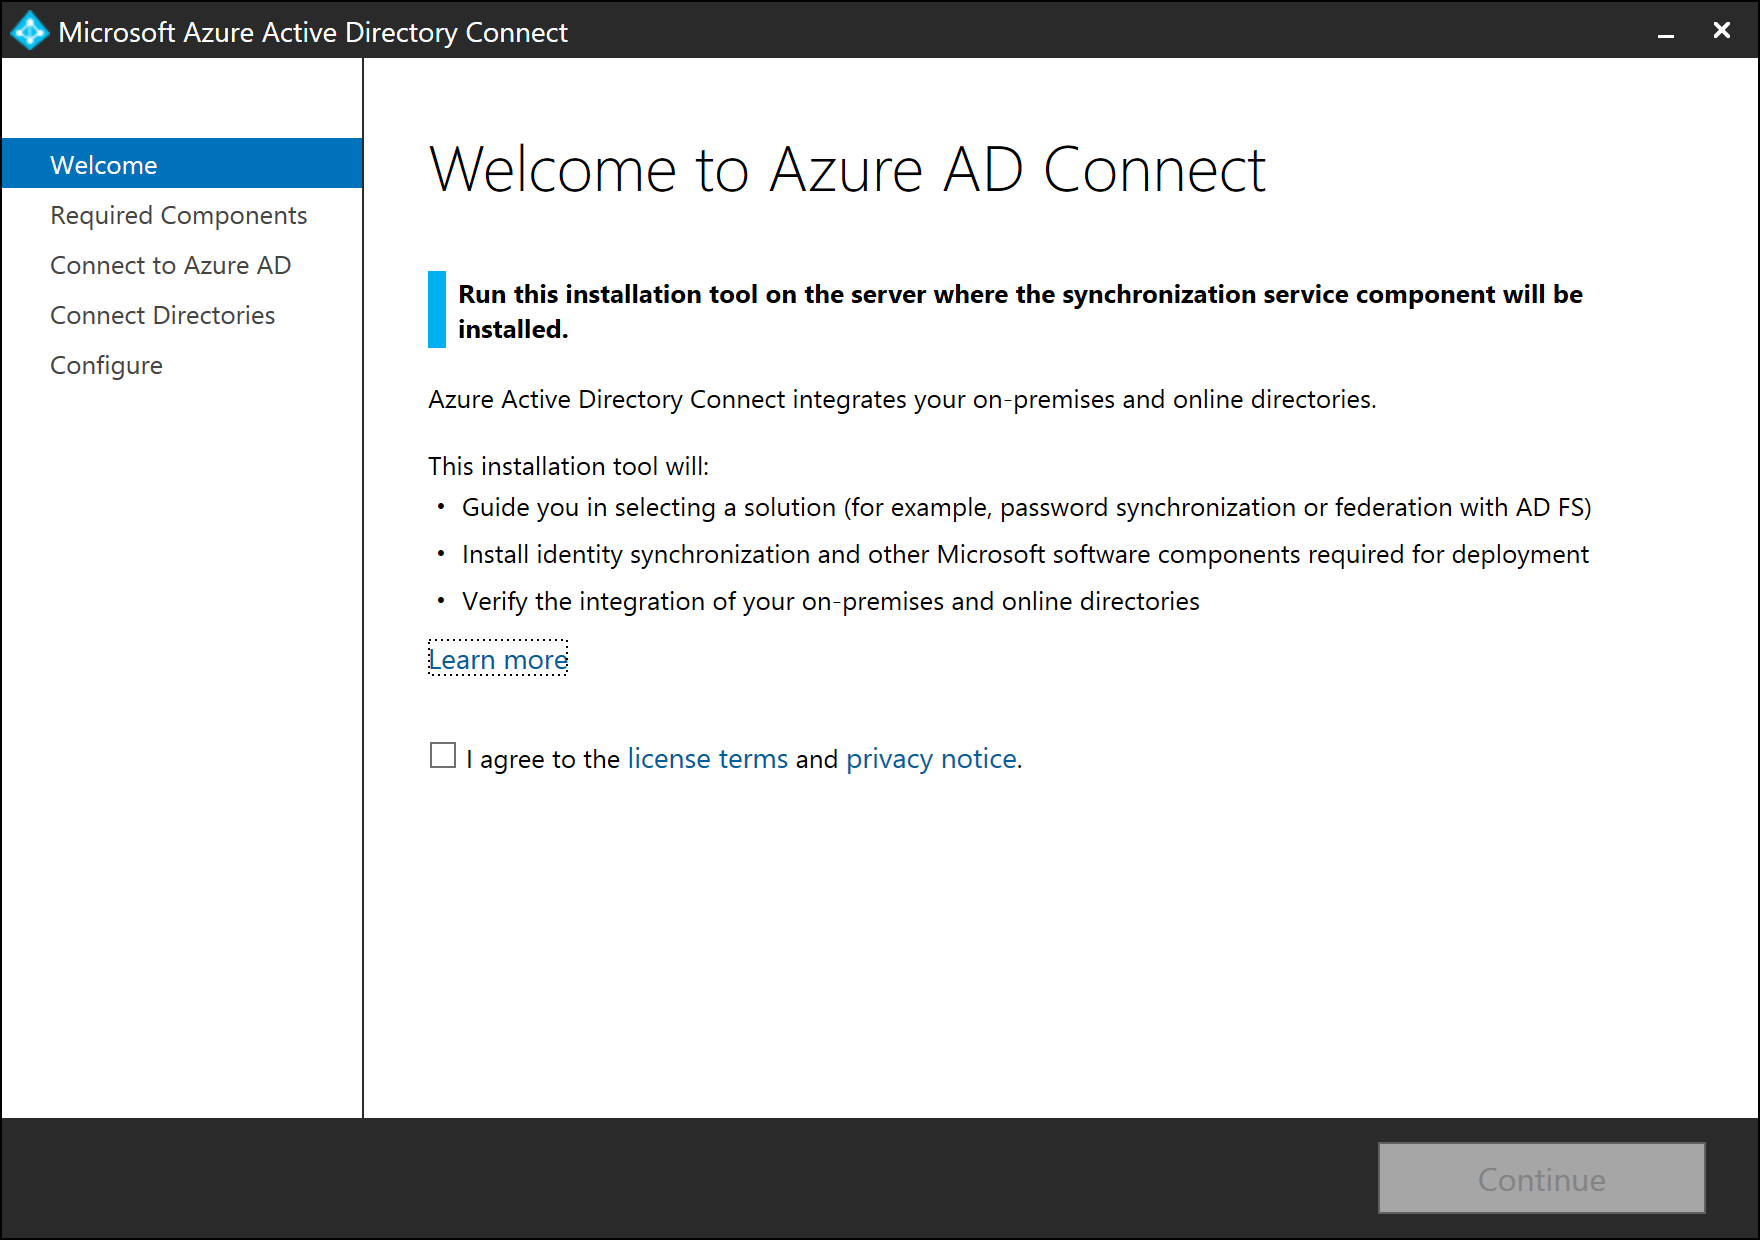 Screenshot that shows the "Welcome to Azure A D Connect" page